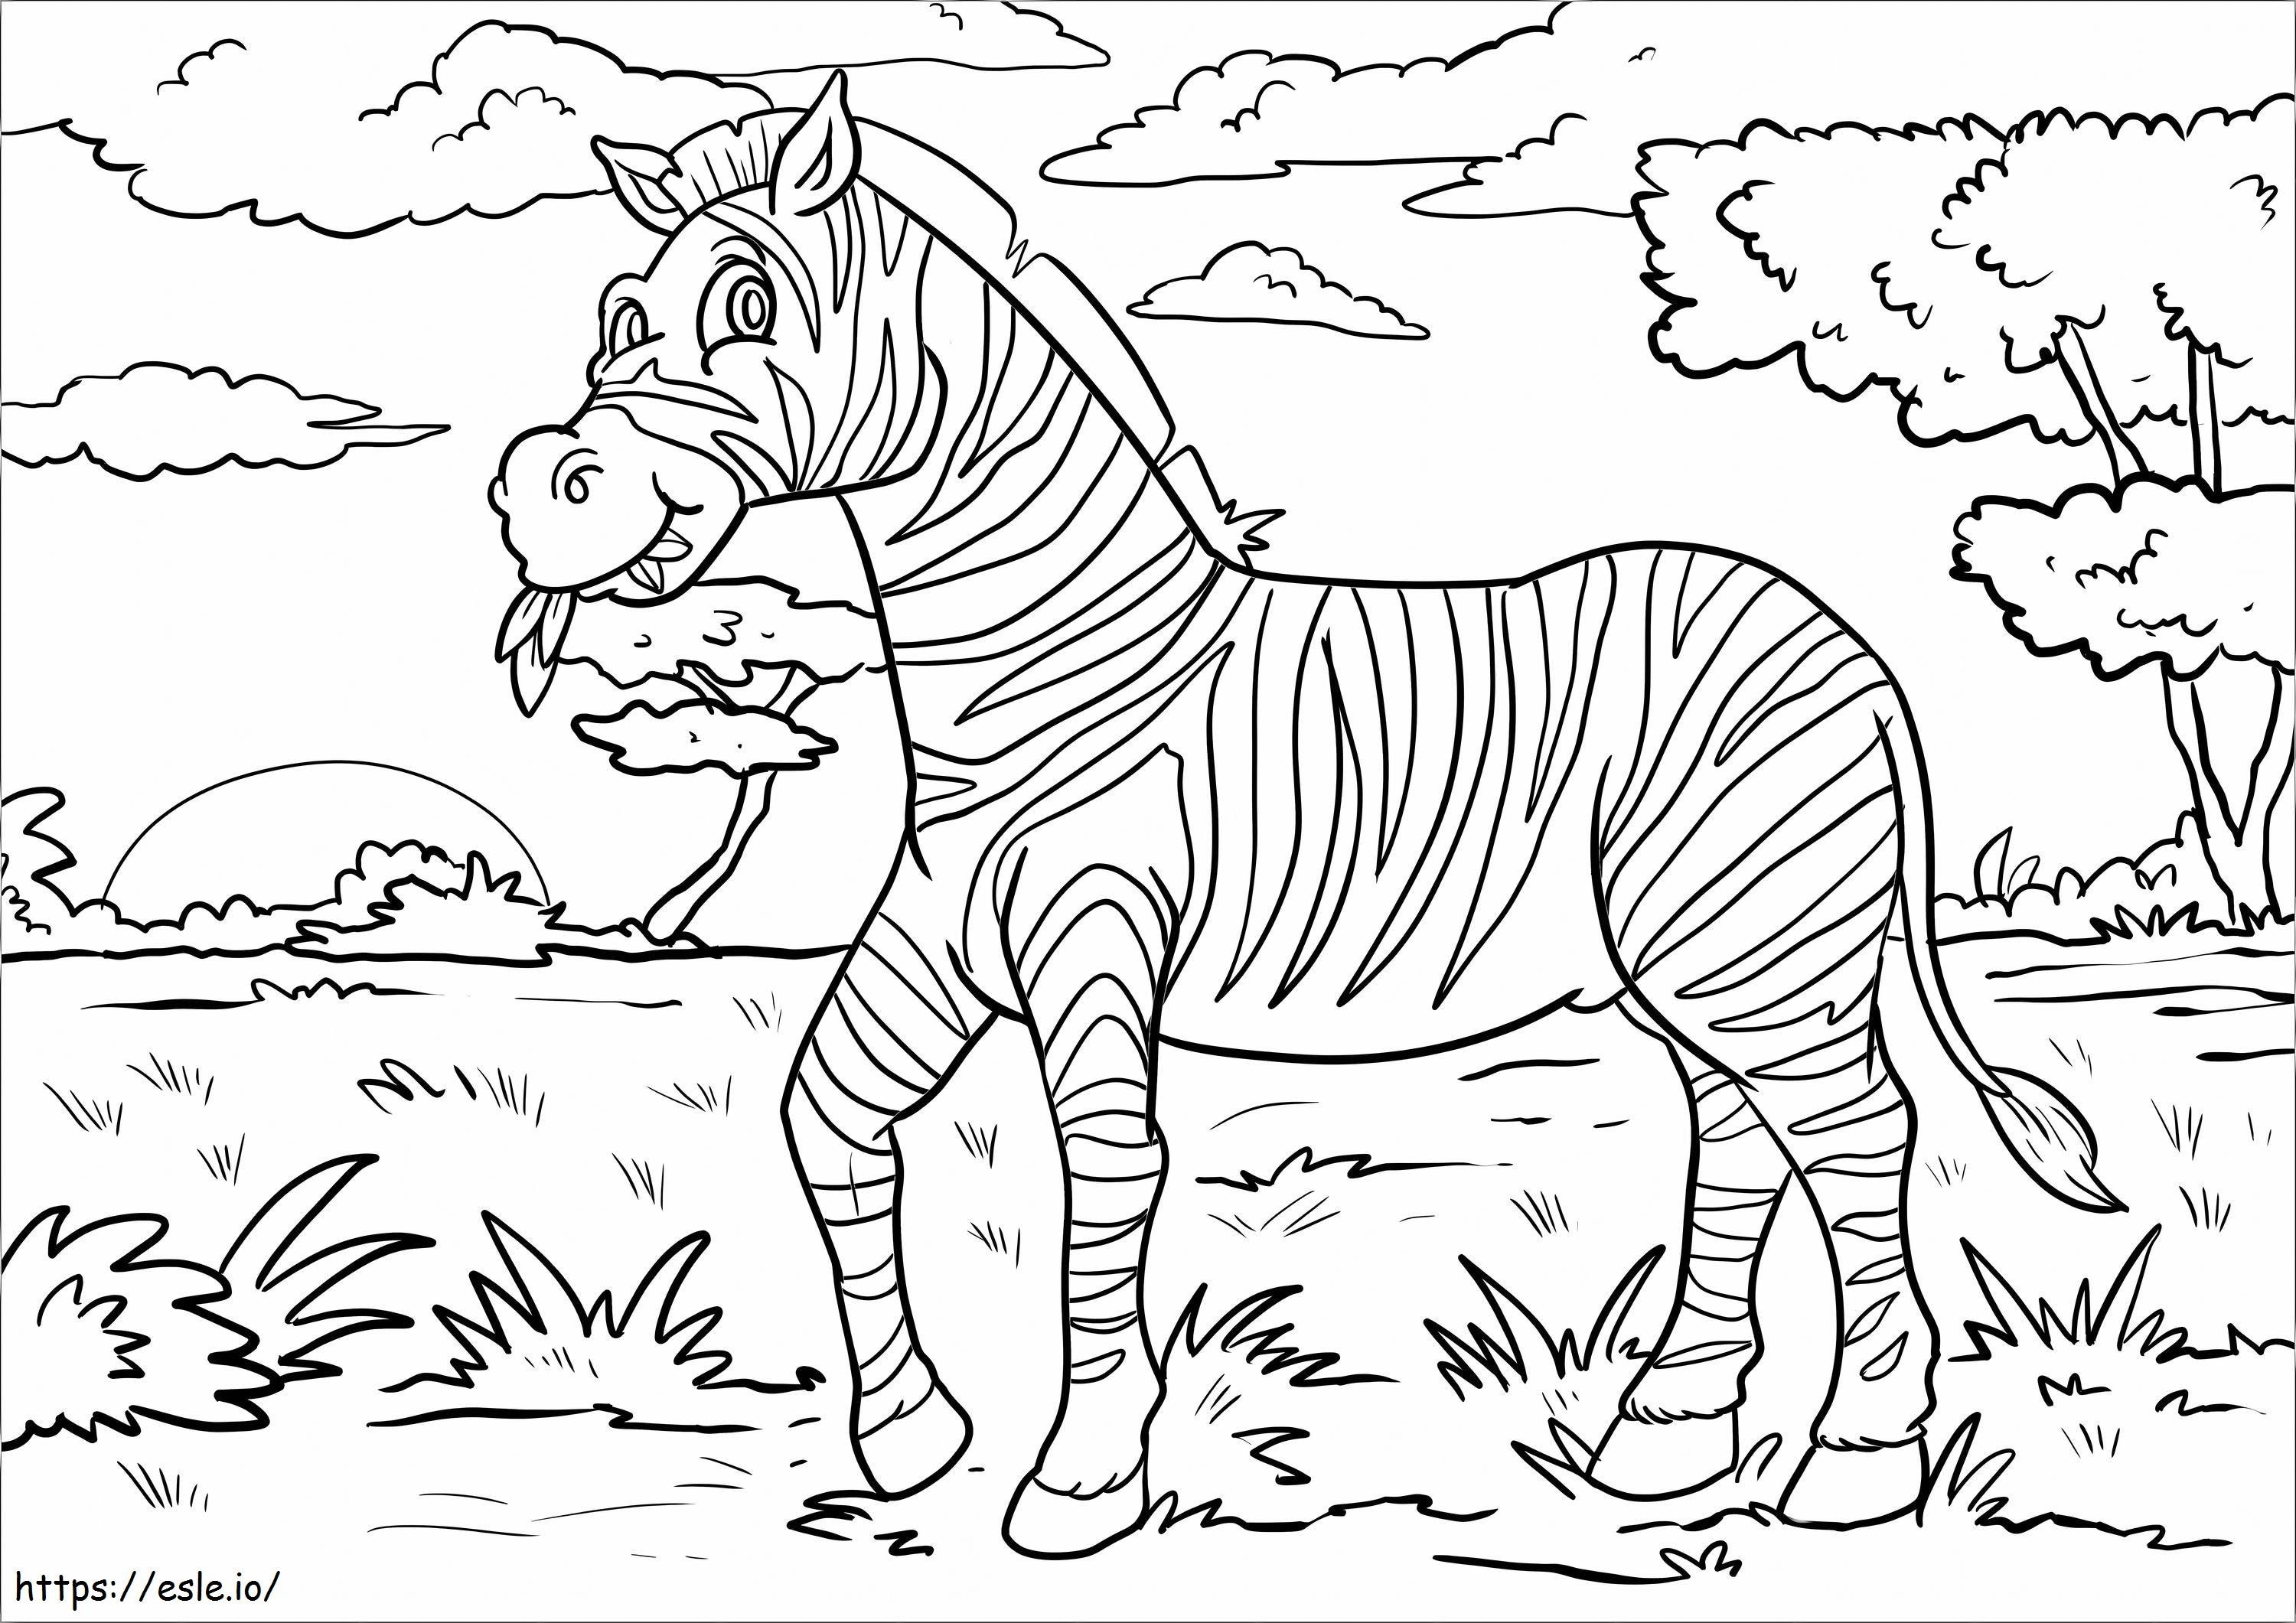 Zebra Eating Grass coloring page